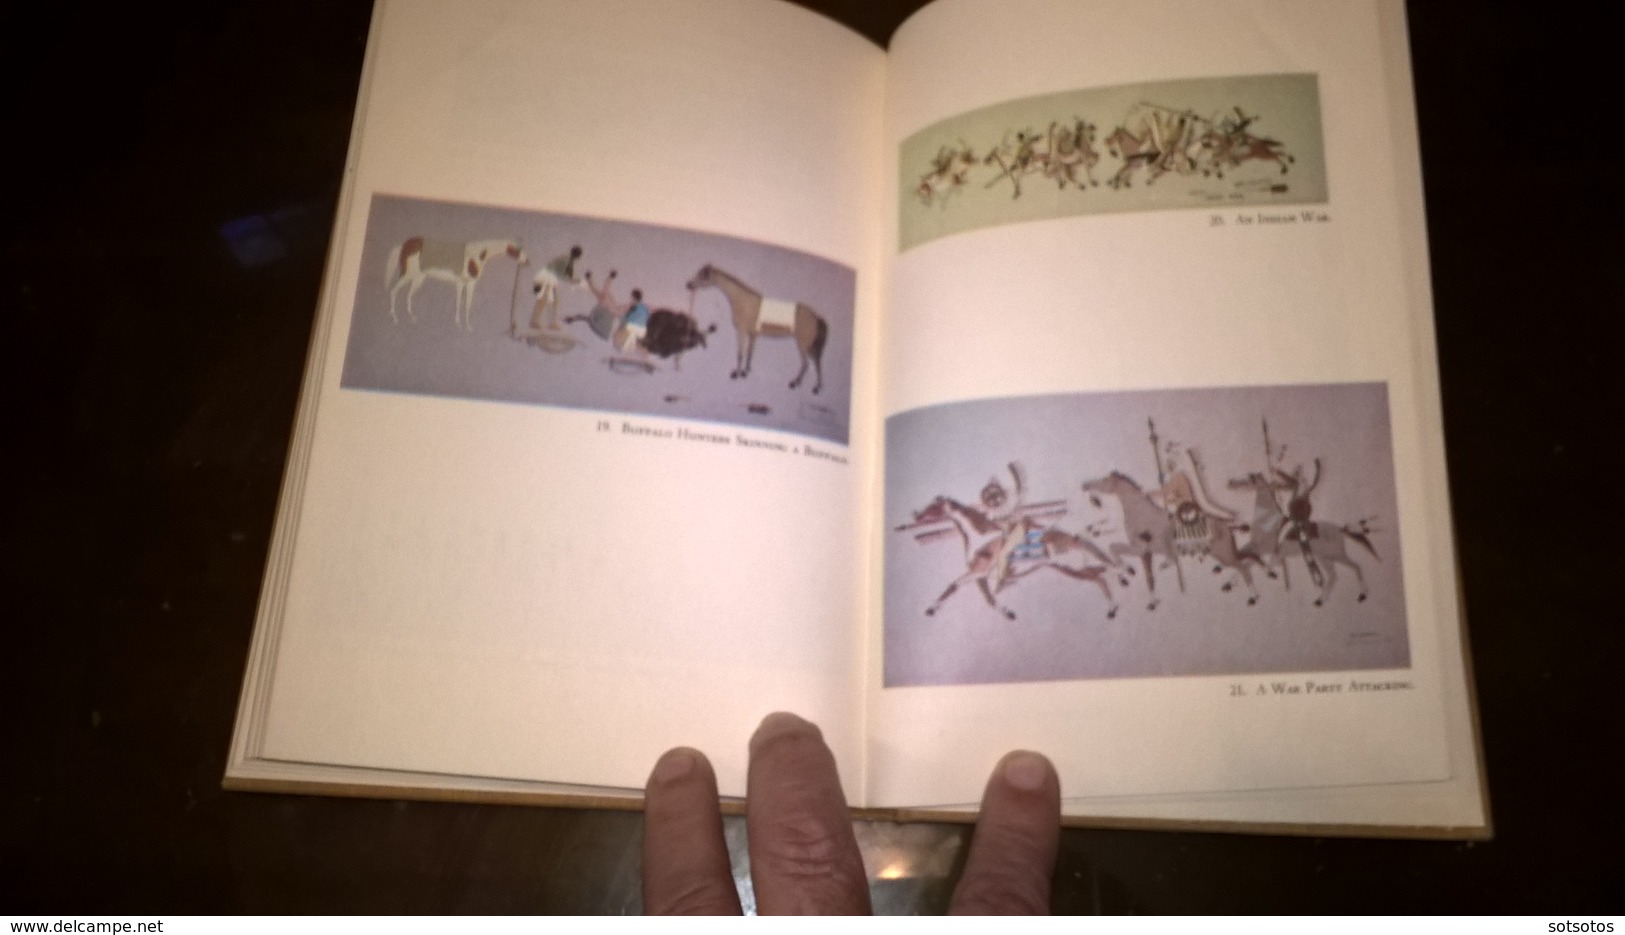 The ARAPAHO Way, a Memoir of an Indian Boyhood: Althea BASS, Ed. Clarcson/Potter (1967), 22 Illustrations in full color